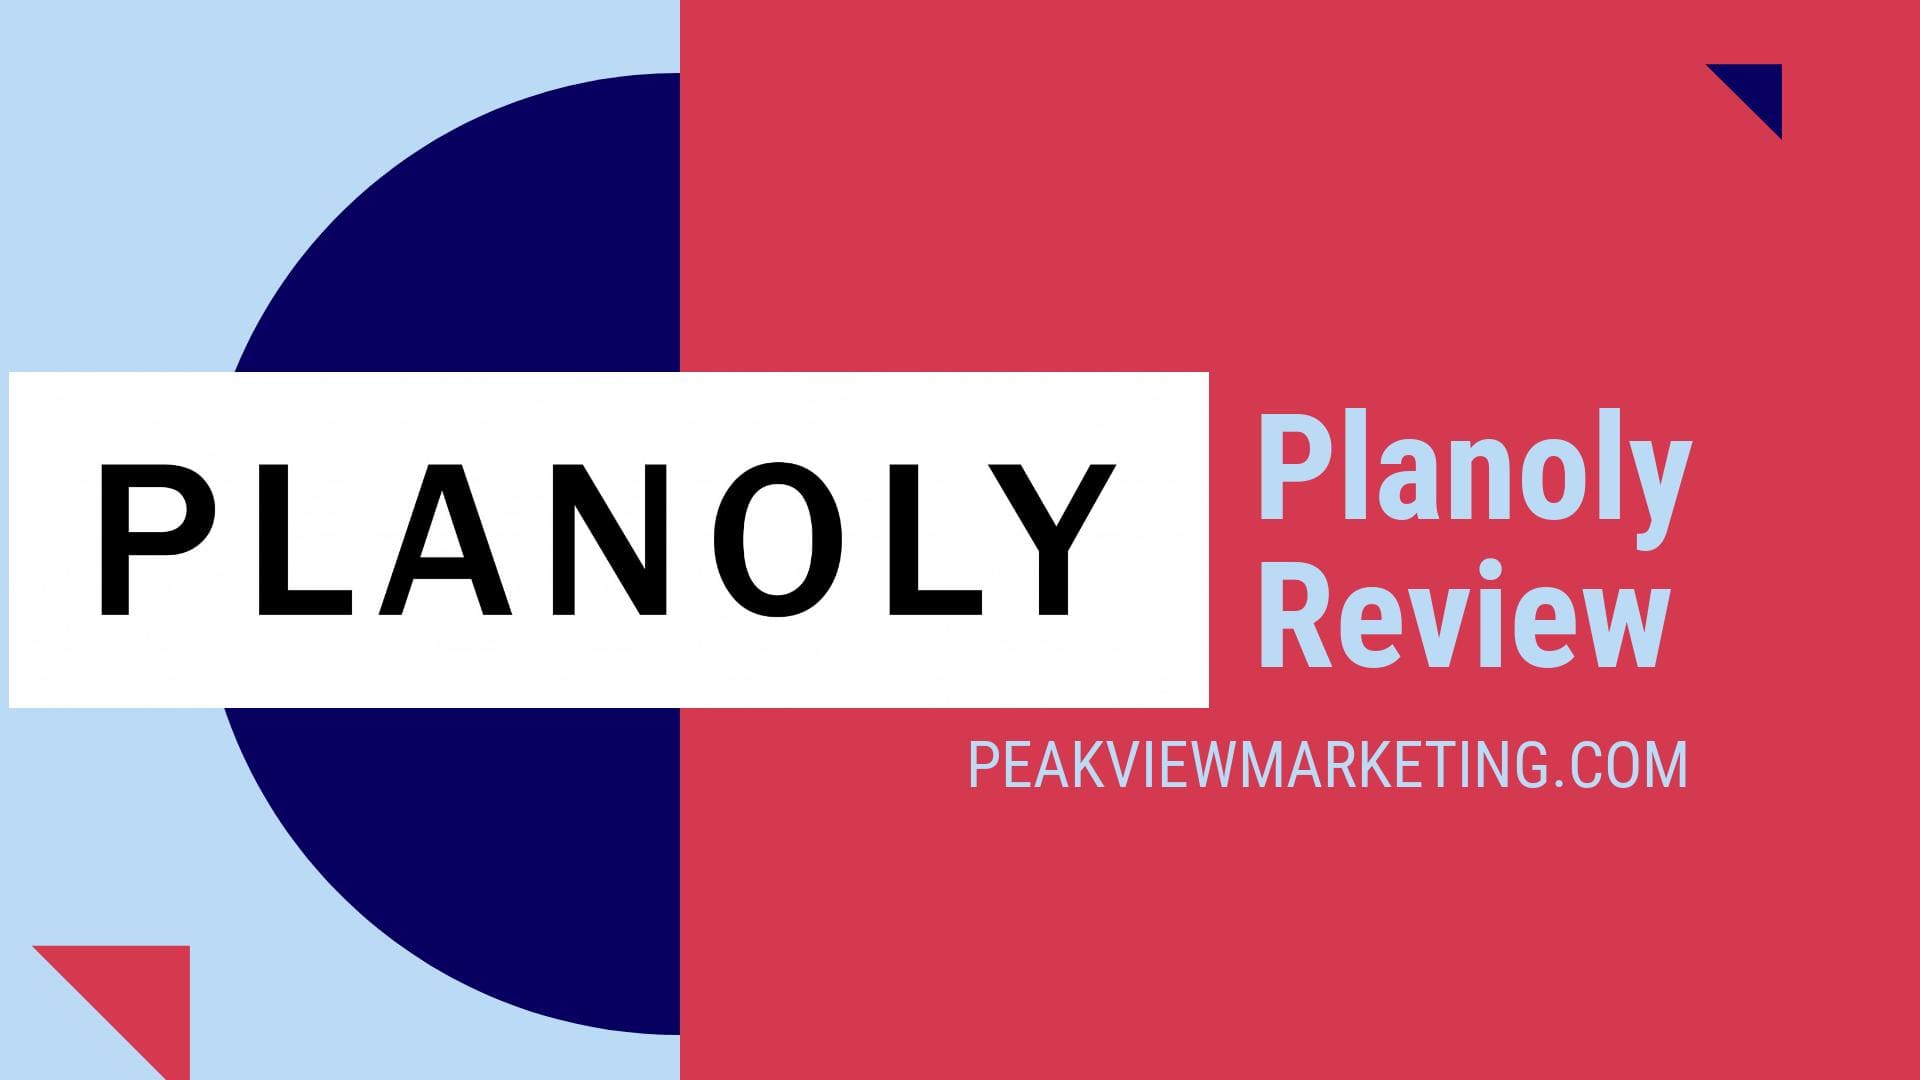 Planoly Review Image